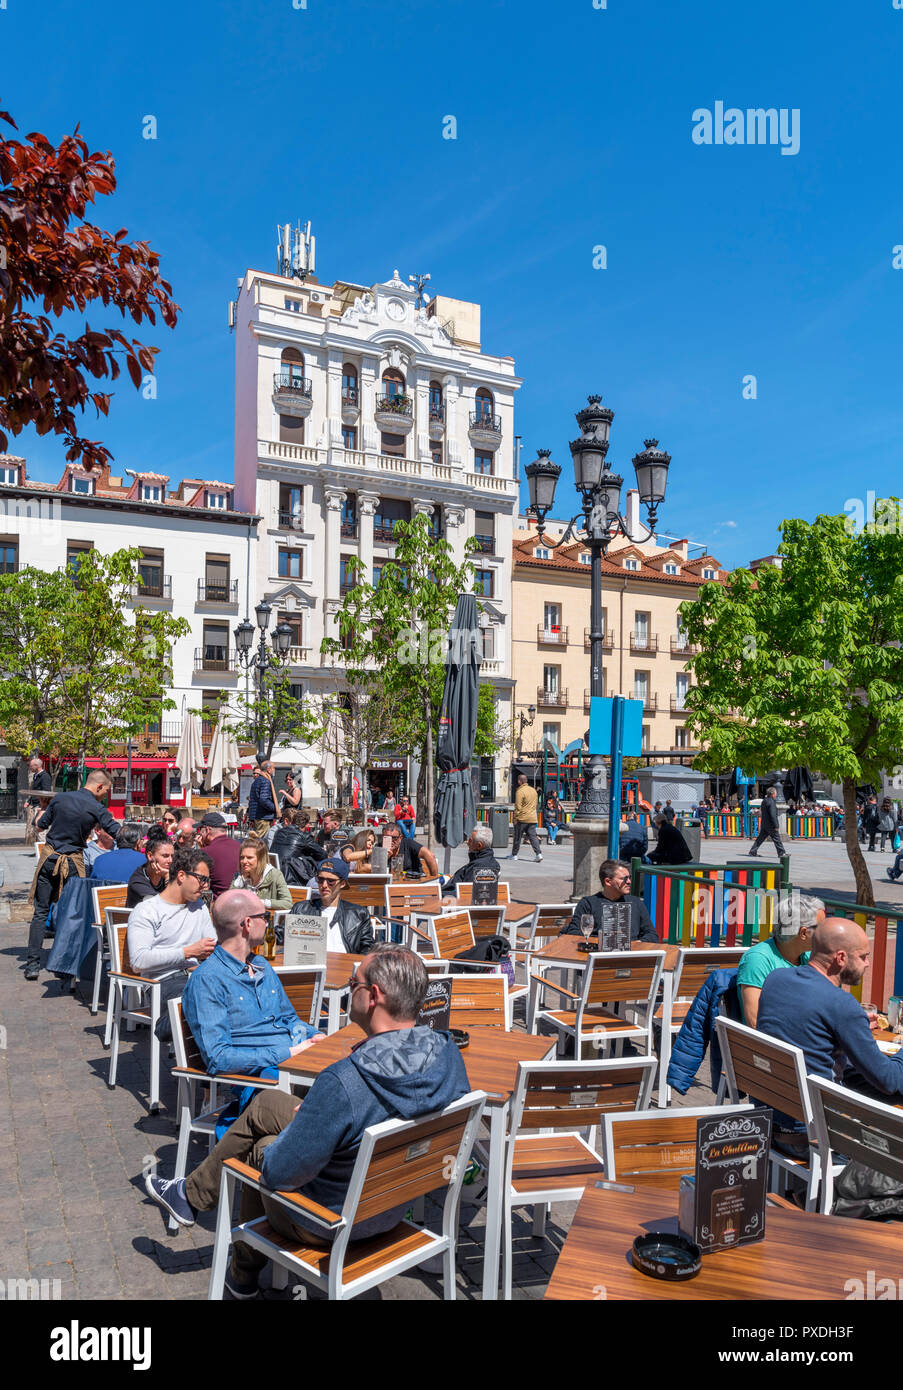 Cafes and bars on Plaza de Santa Ana at lunchtime, Huertas district, Madrid, Spain Stock Photo